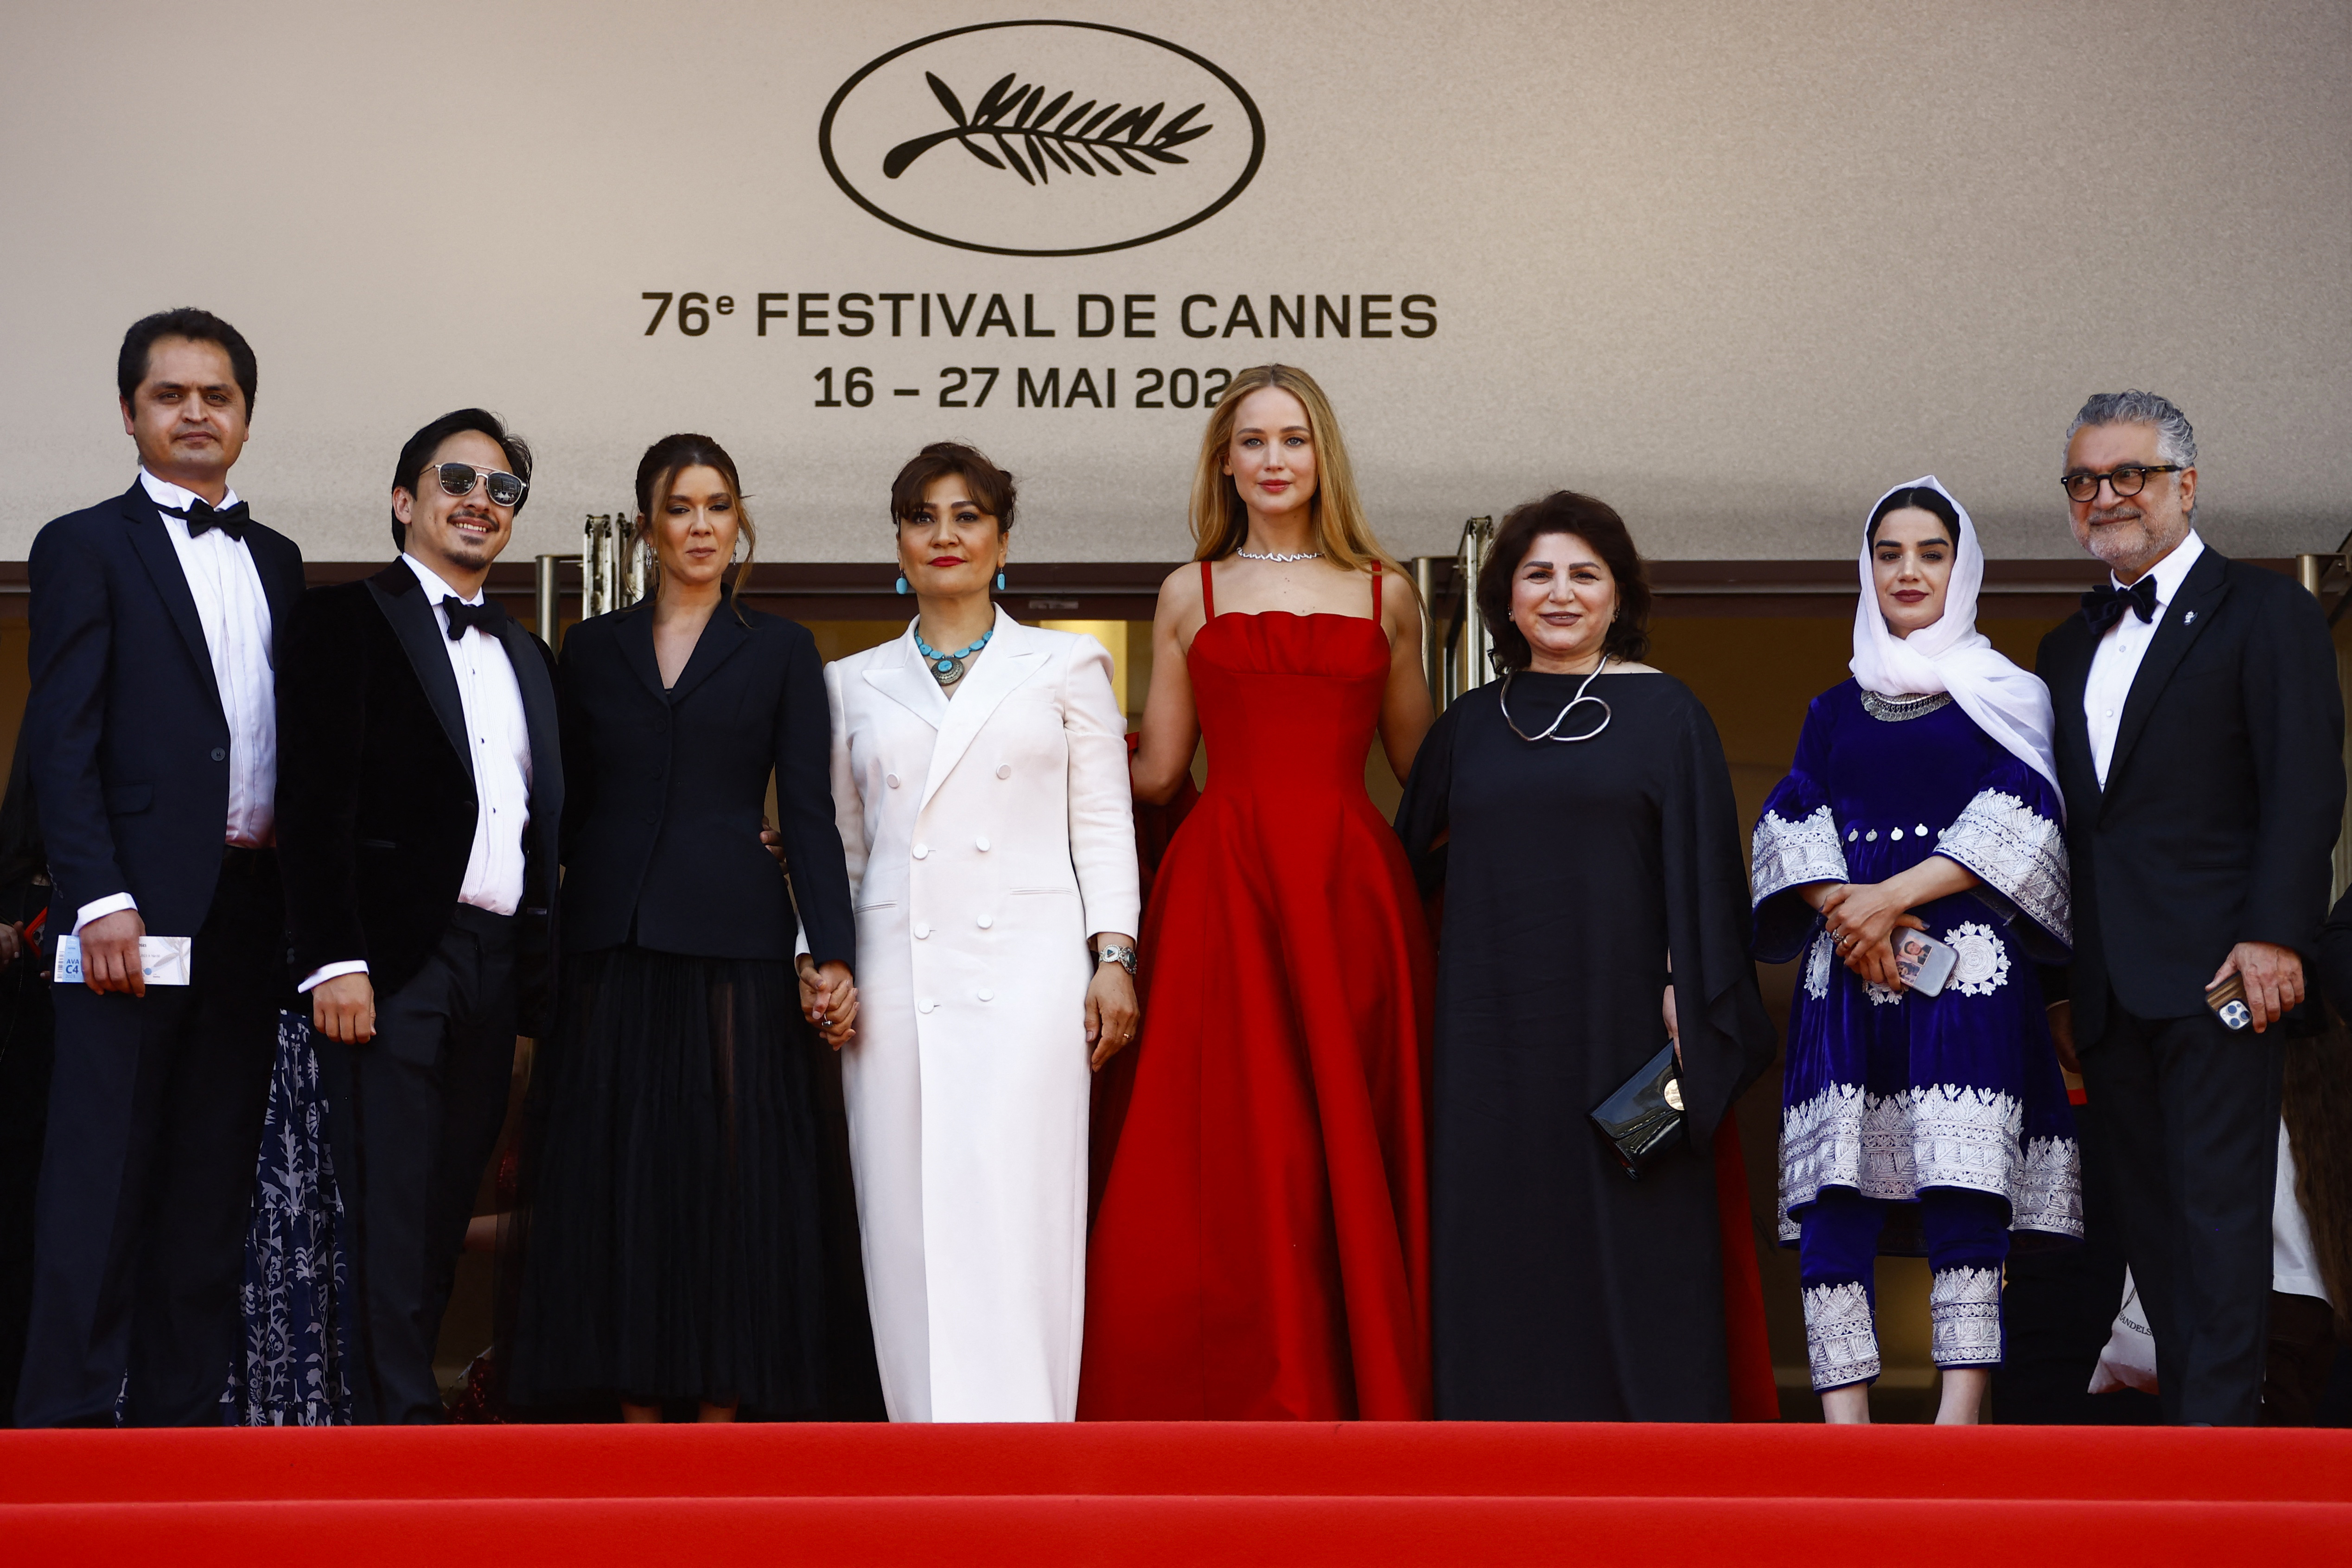 The 76th Cannes Film Festival - Screening of the film "Anatomie d'une chute" in competition - Red Carpet Arrivals